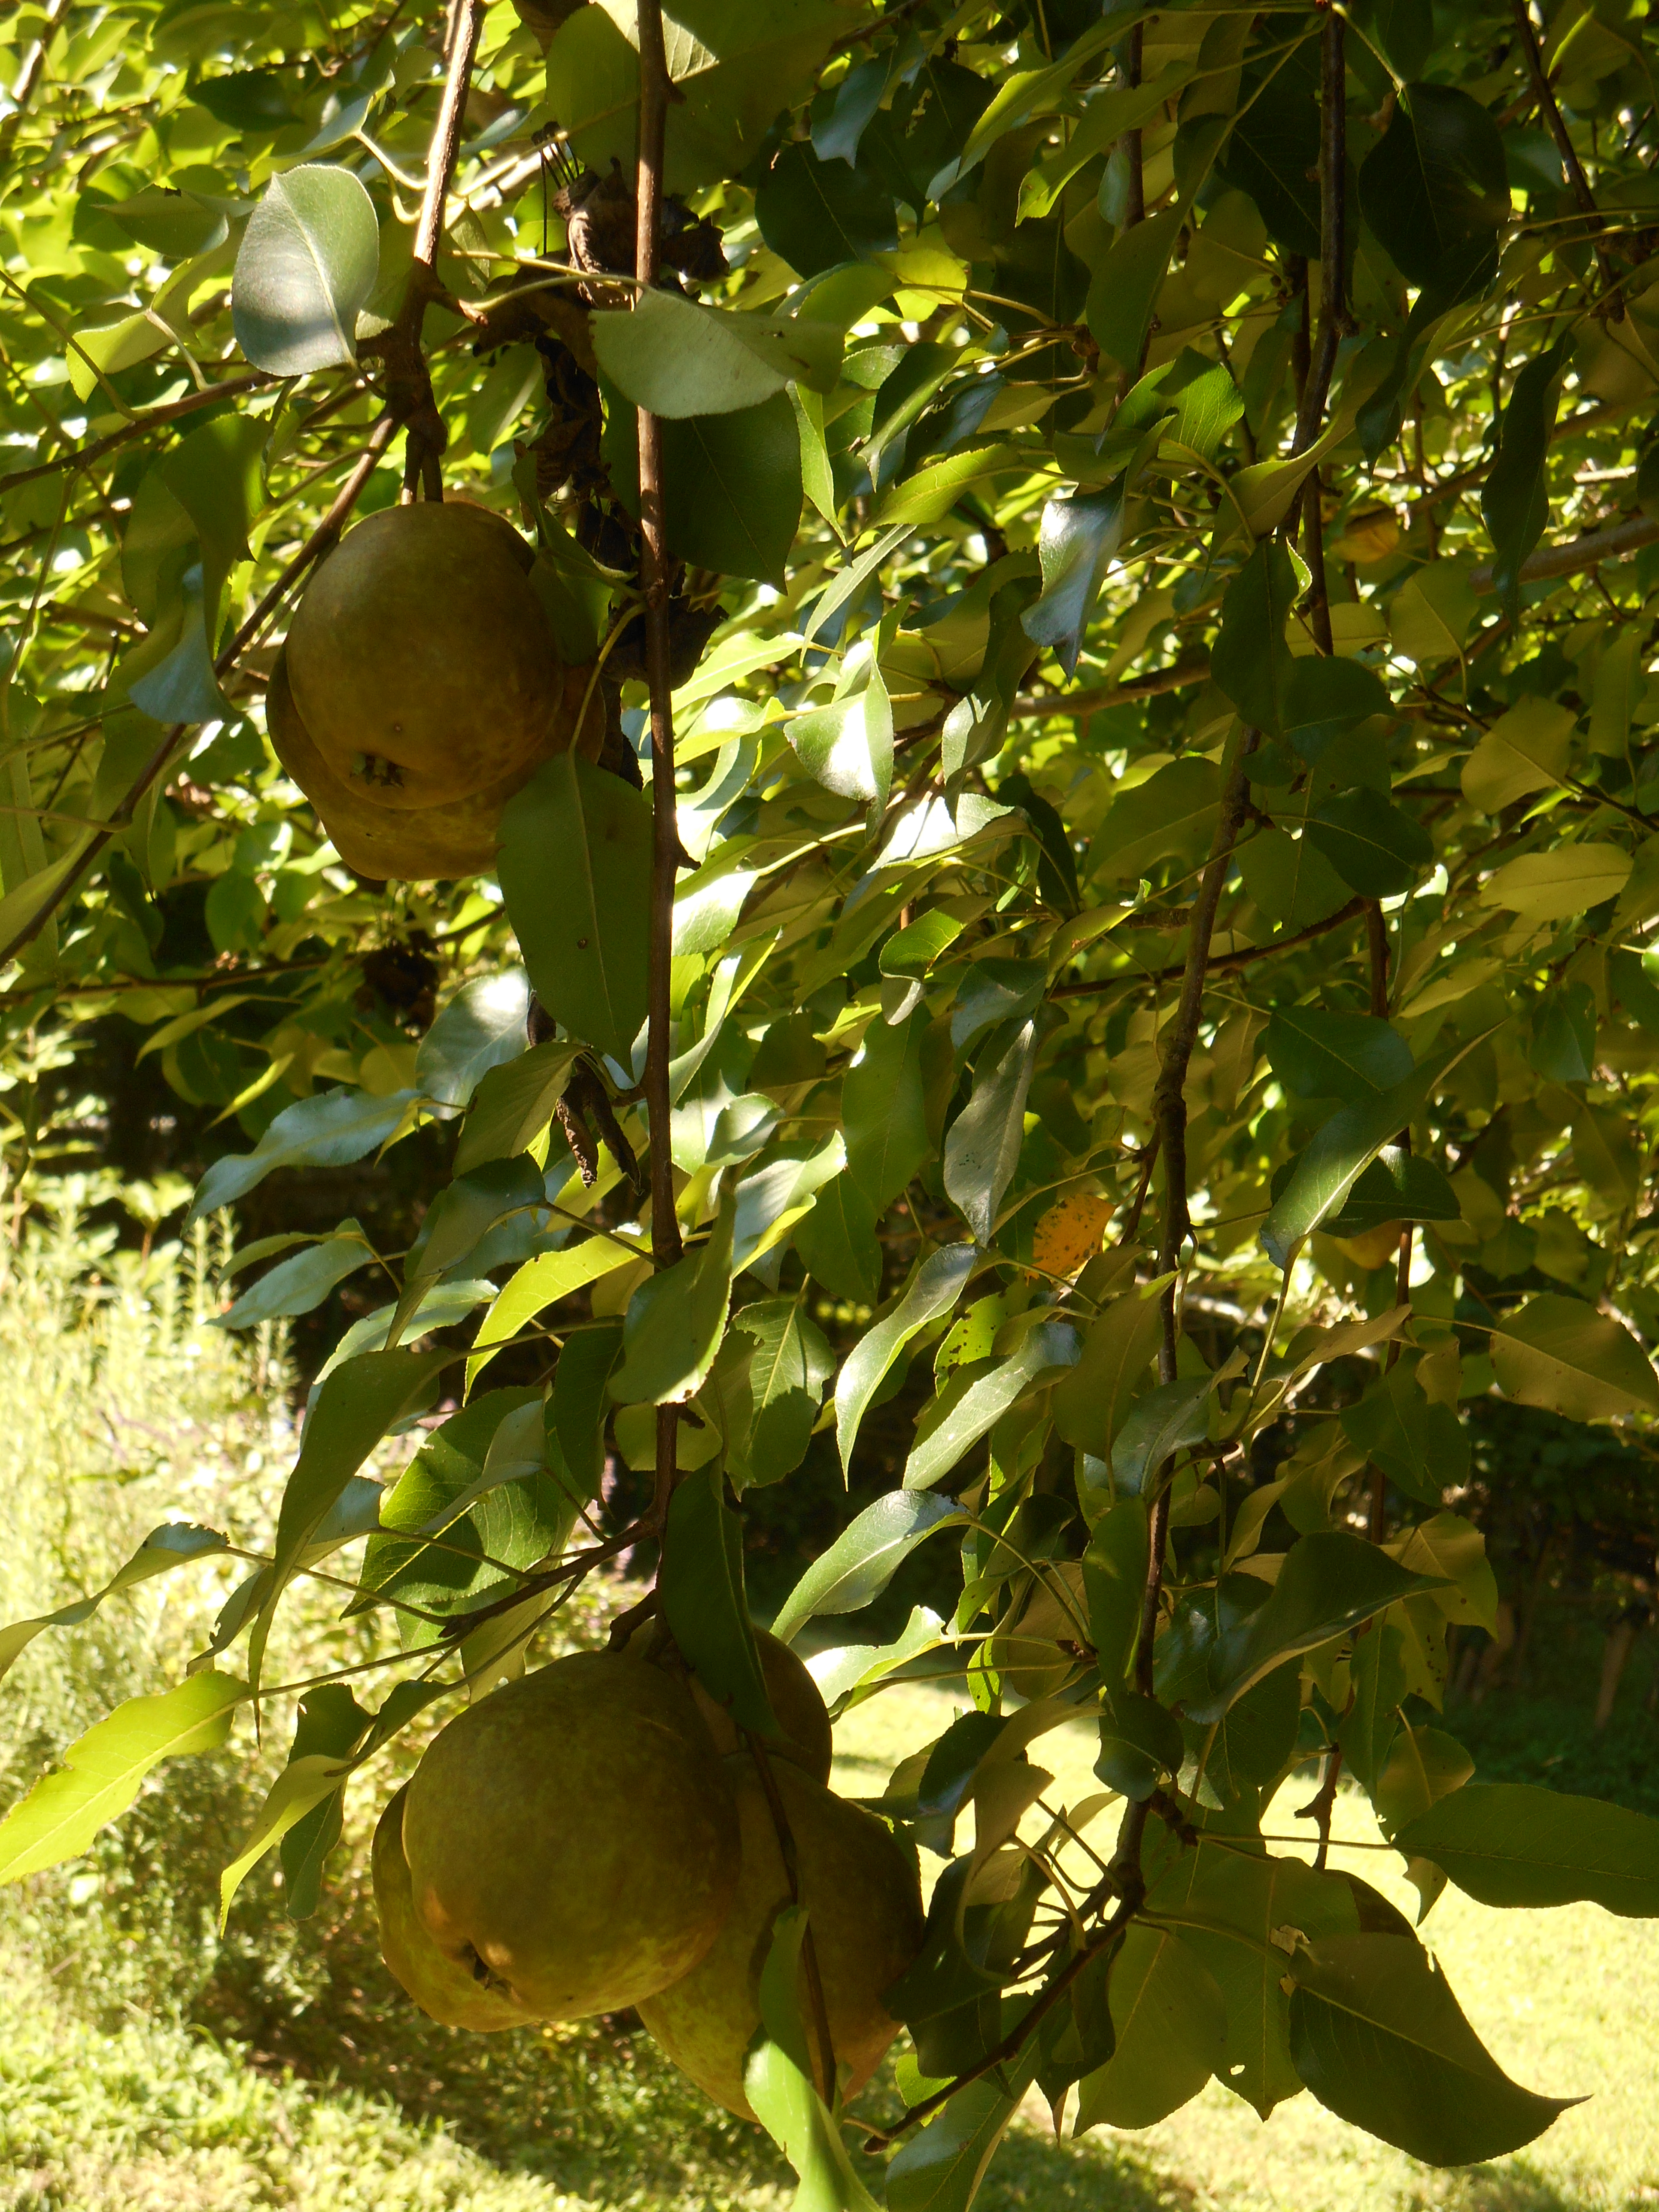 Our pear crop, August 2014